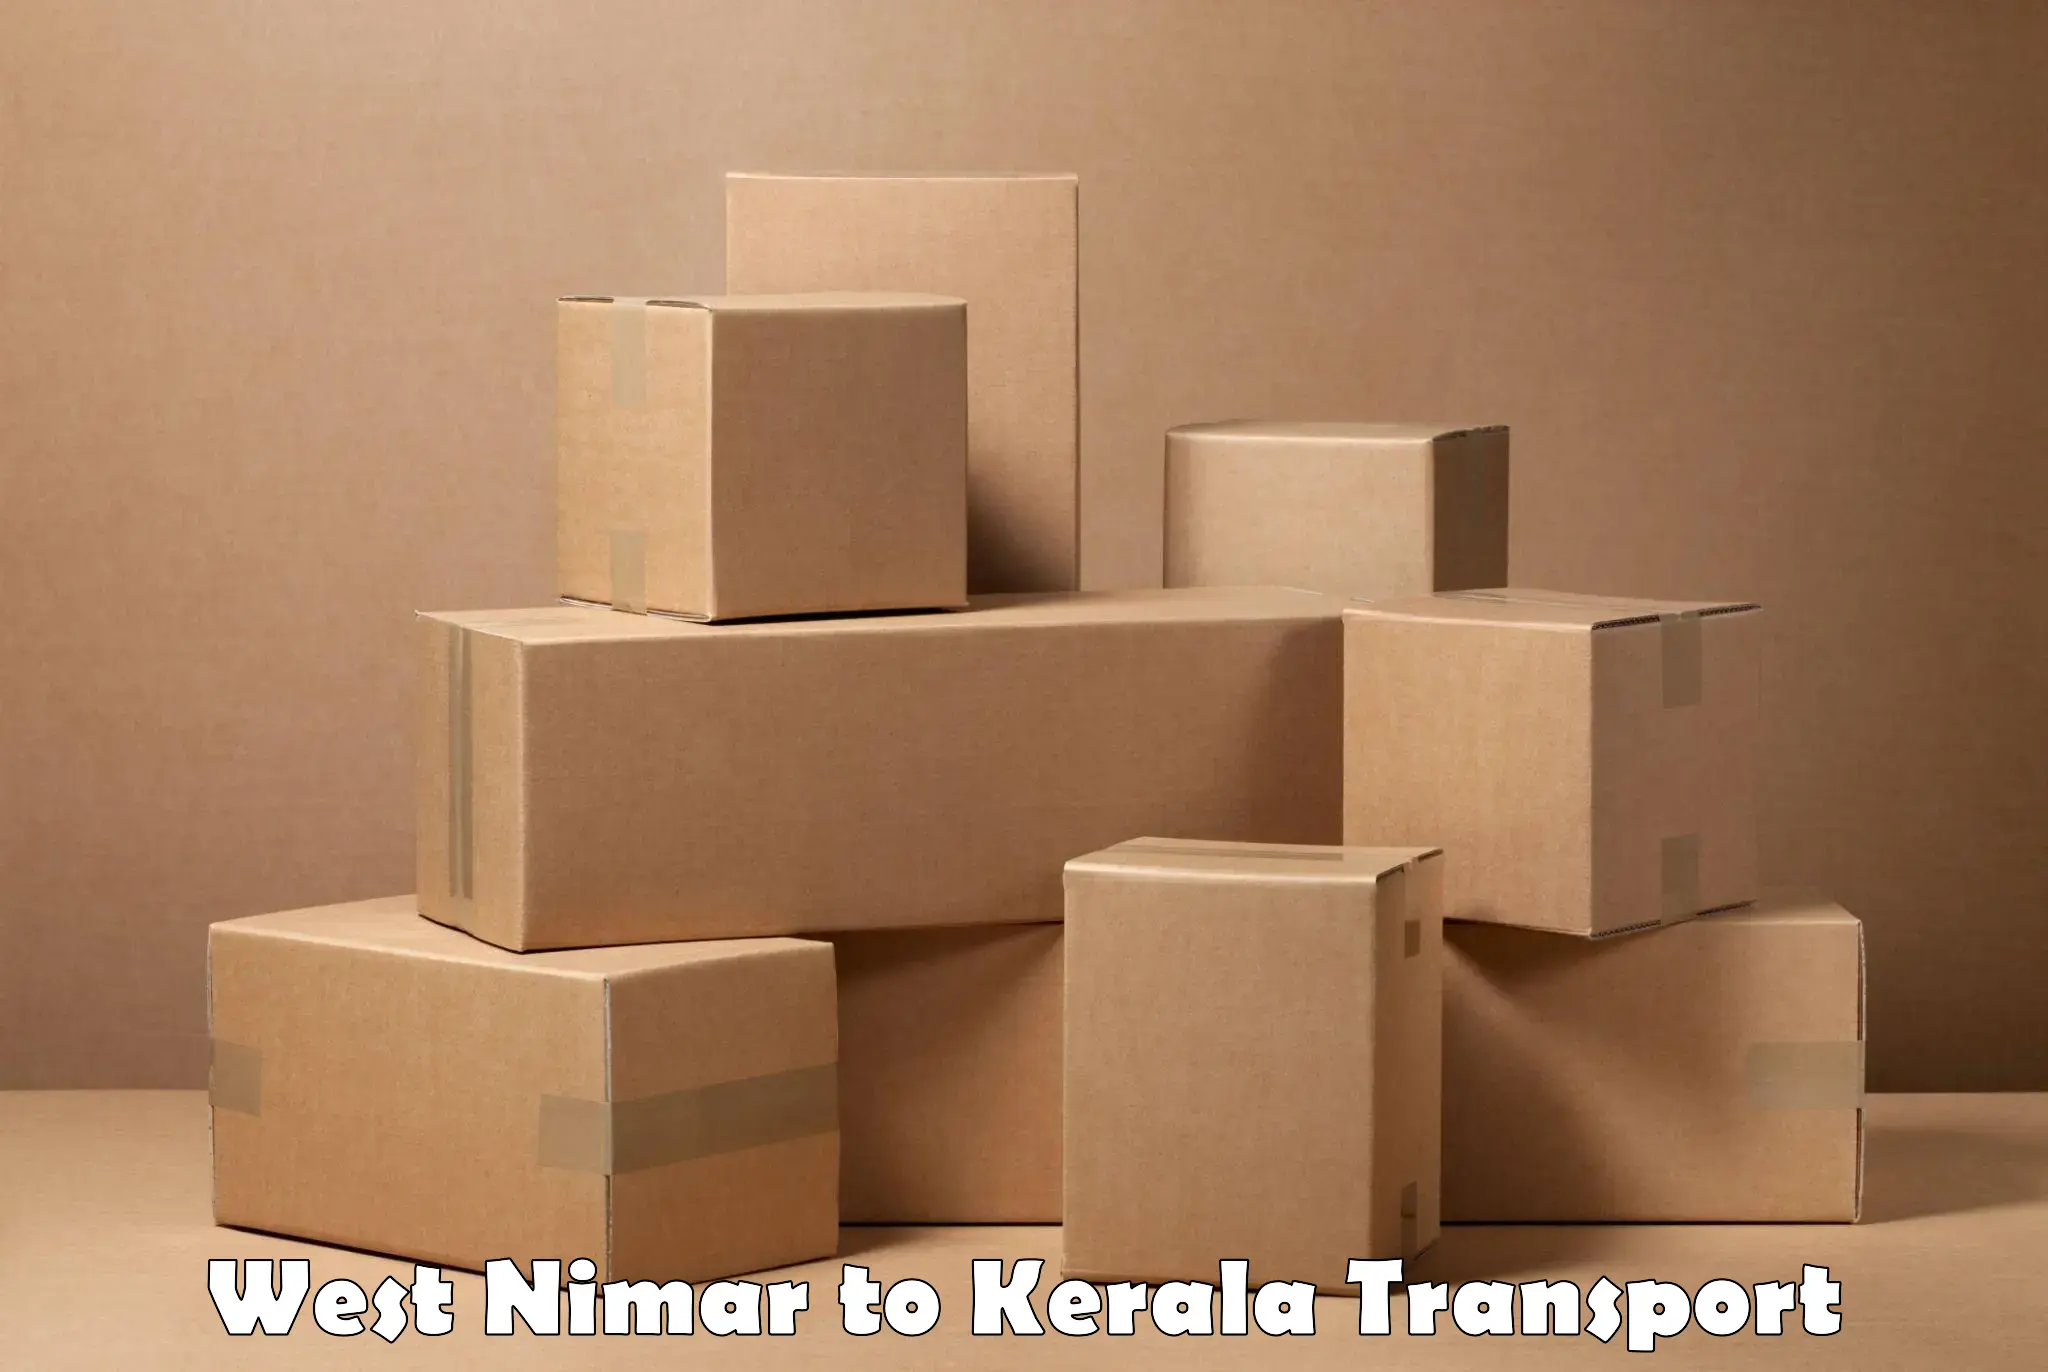 Nearby transport service West Nimar to Palai